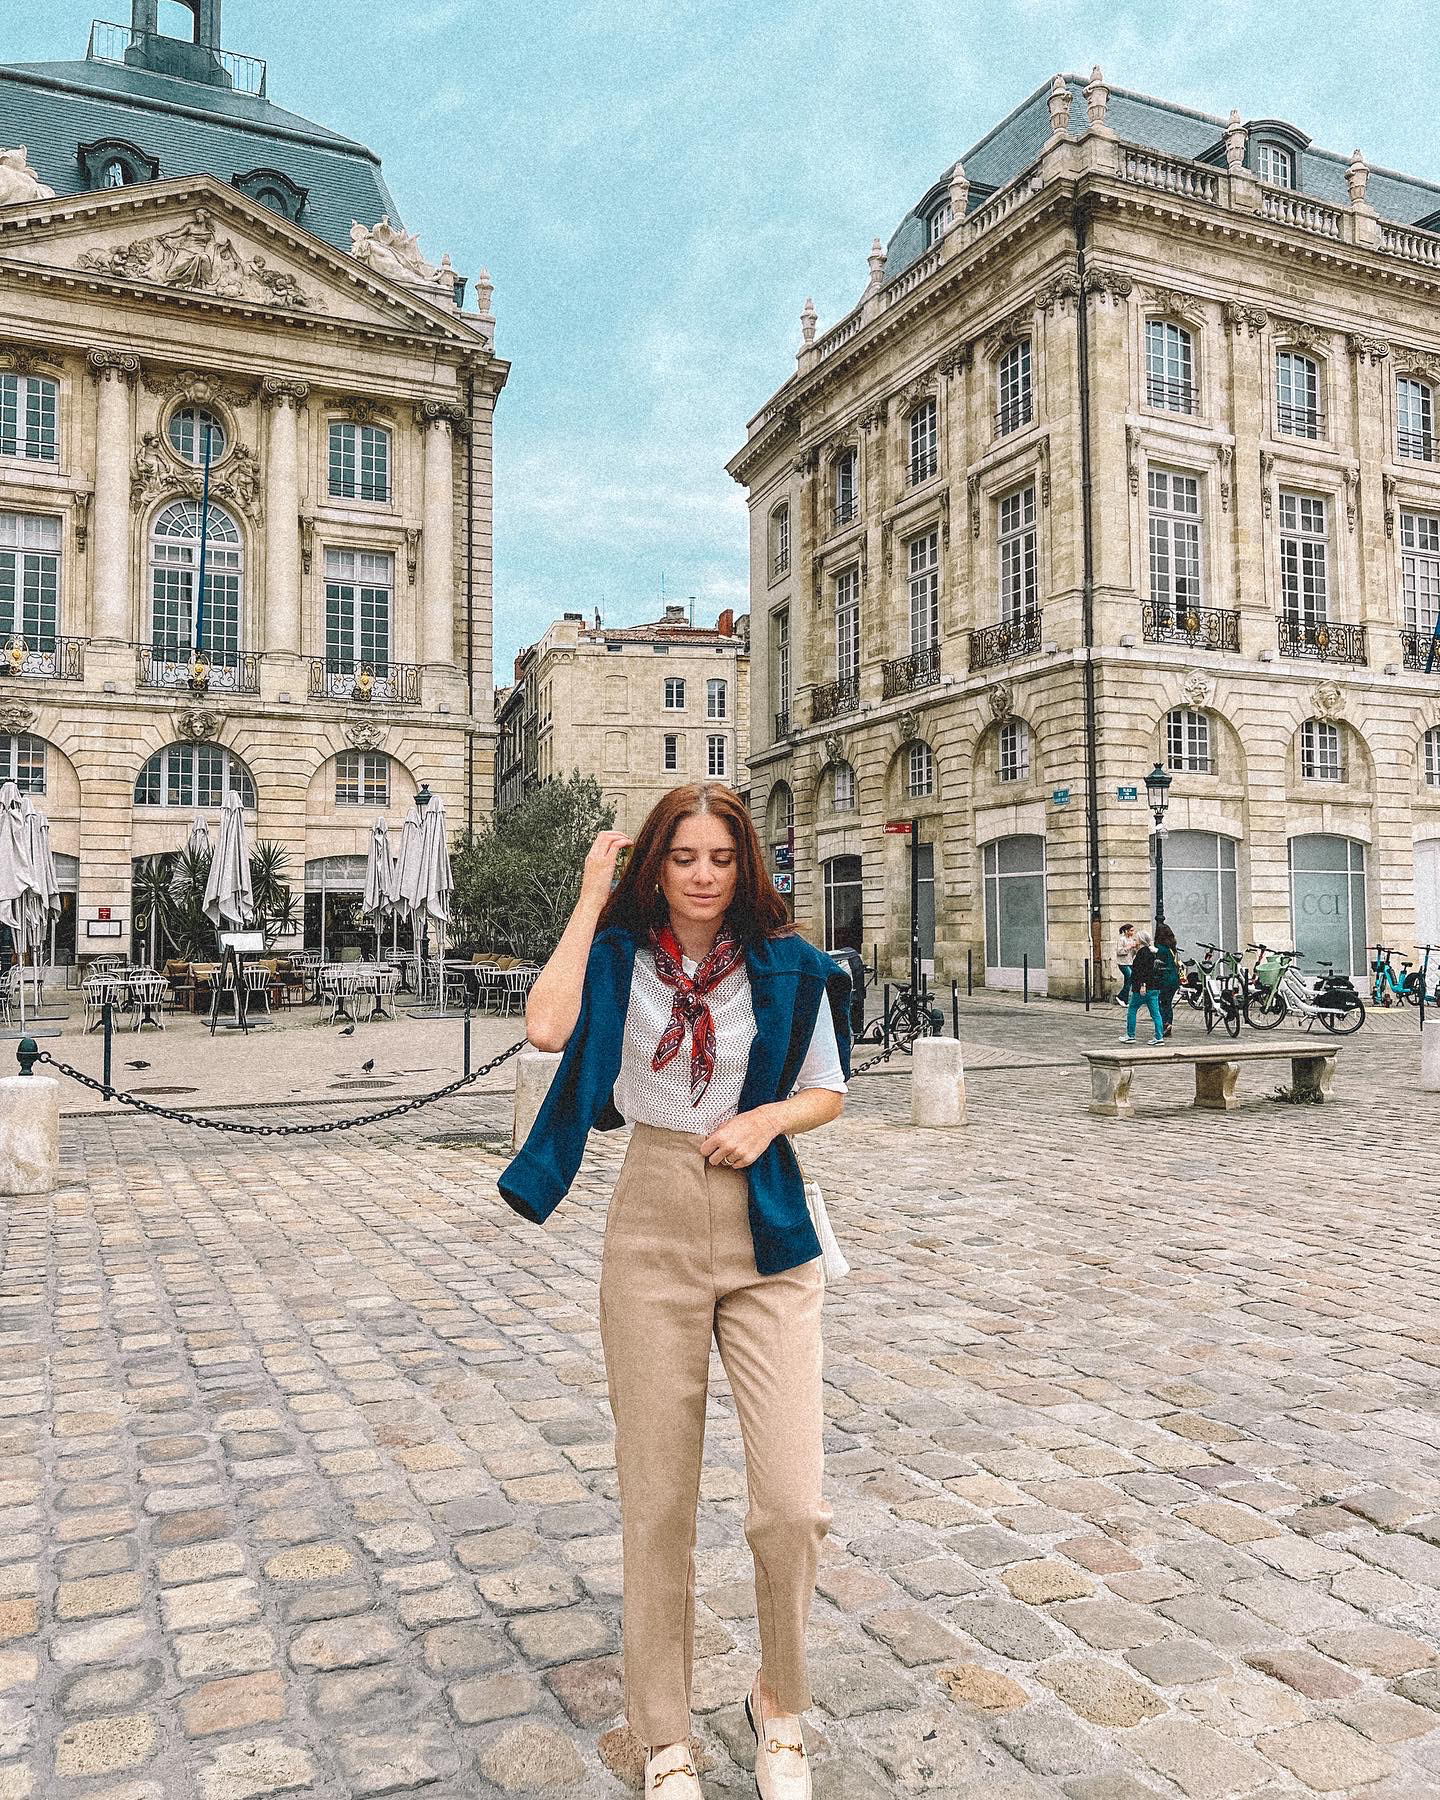 One day in Bordeaux